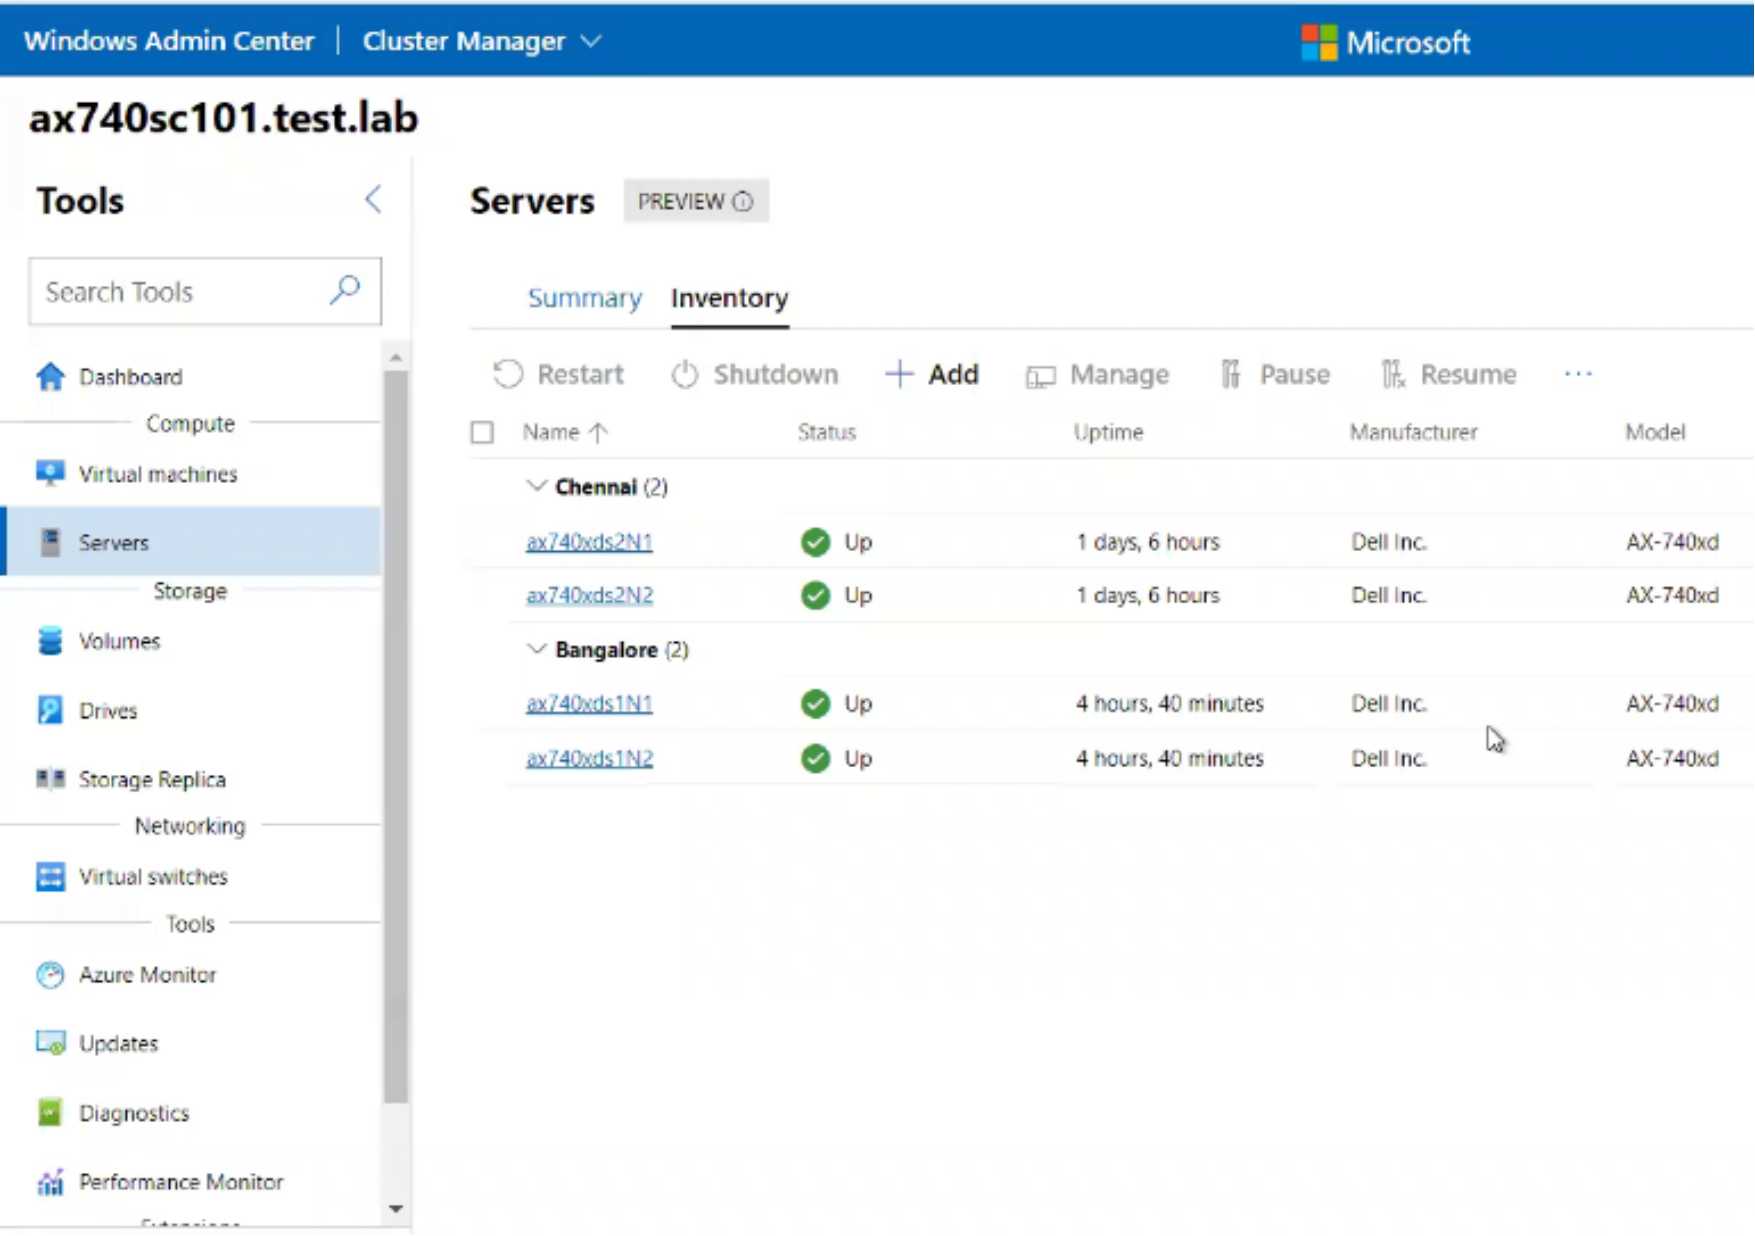 Healthy cluster reported by Windows Admin Center